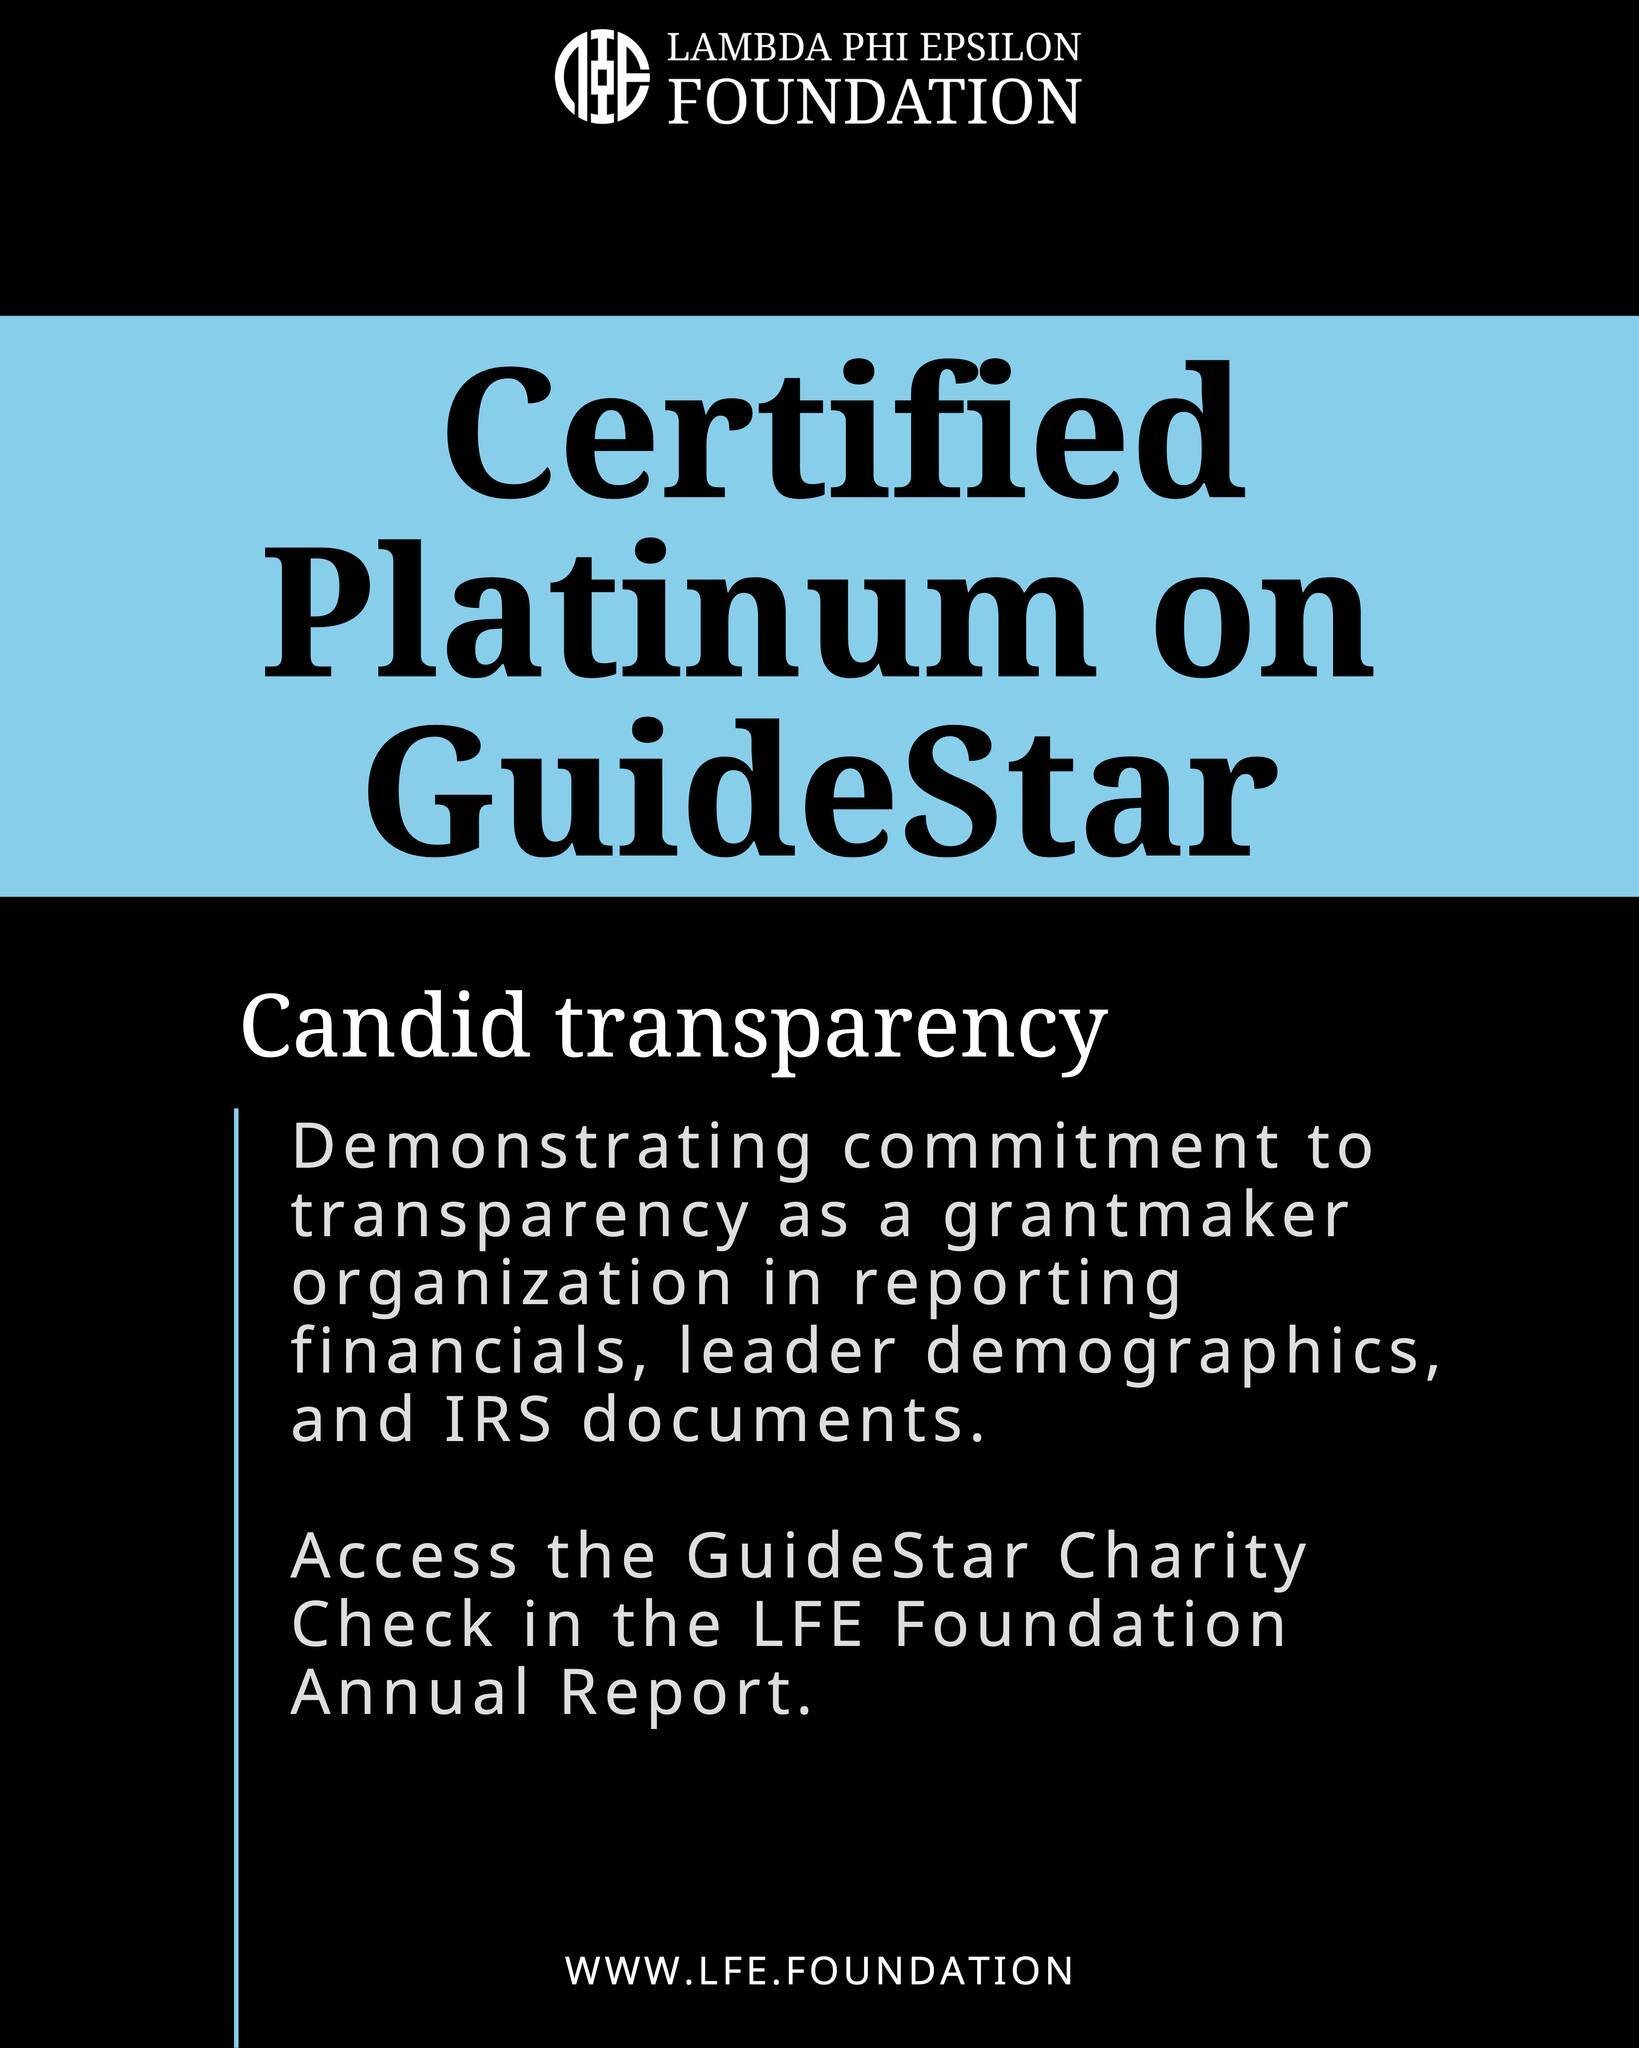 We've received the Platinum Seal of Transparency on GuideStar! We demonstrate our commitment to transparency as a grantmaker organization in reporting financials, leader demographics, and documents required by the Internal Revenue Service. 🧾 Access 